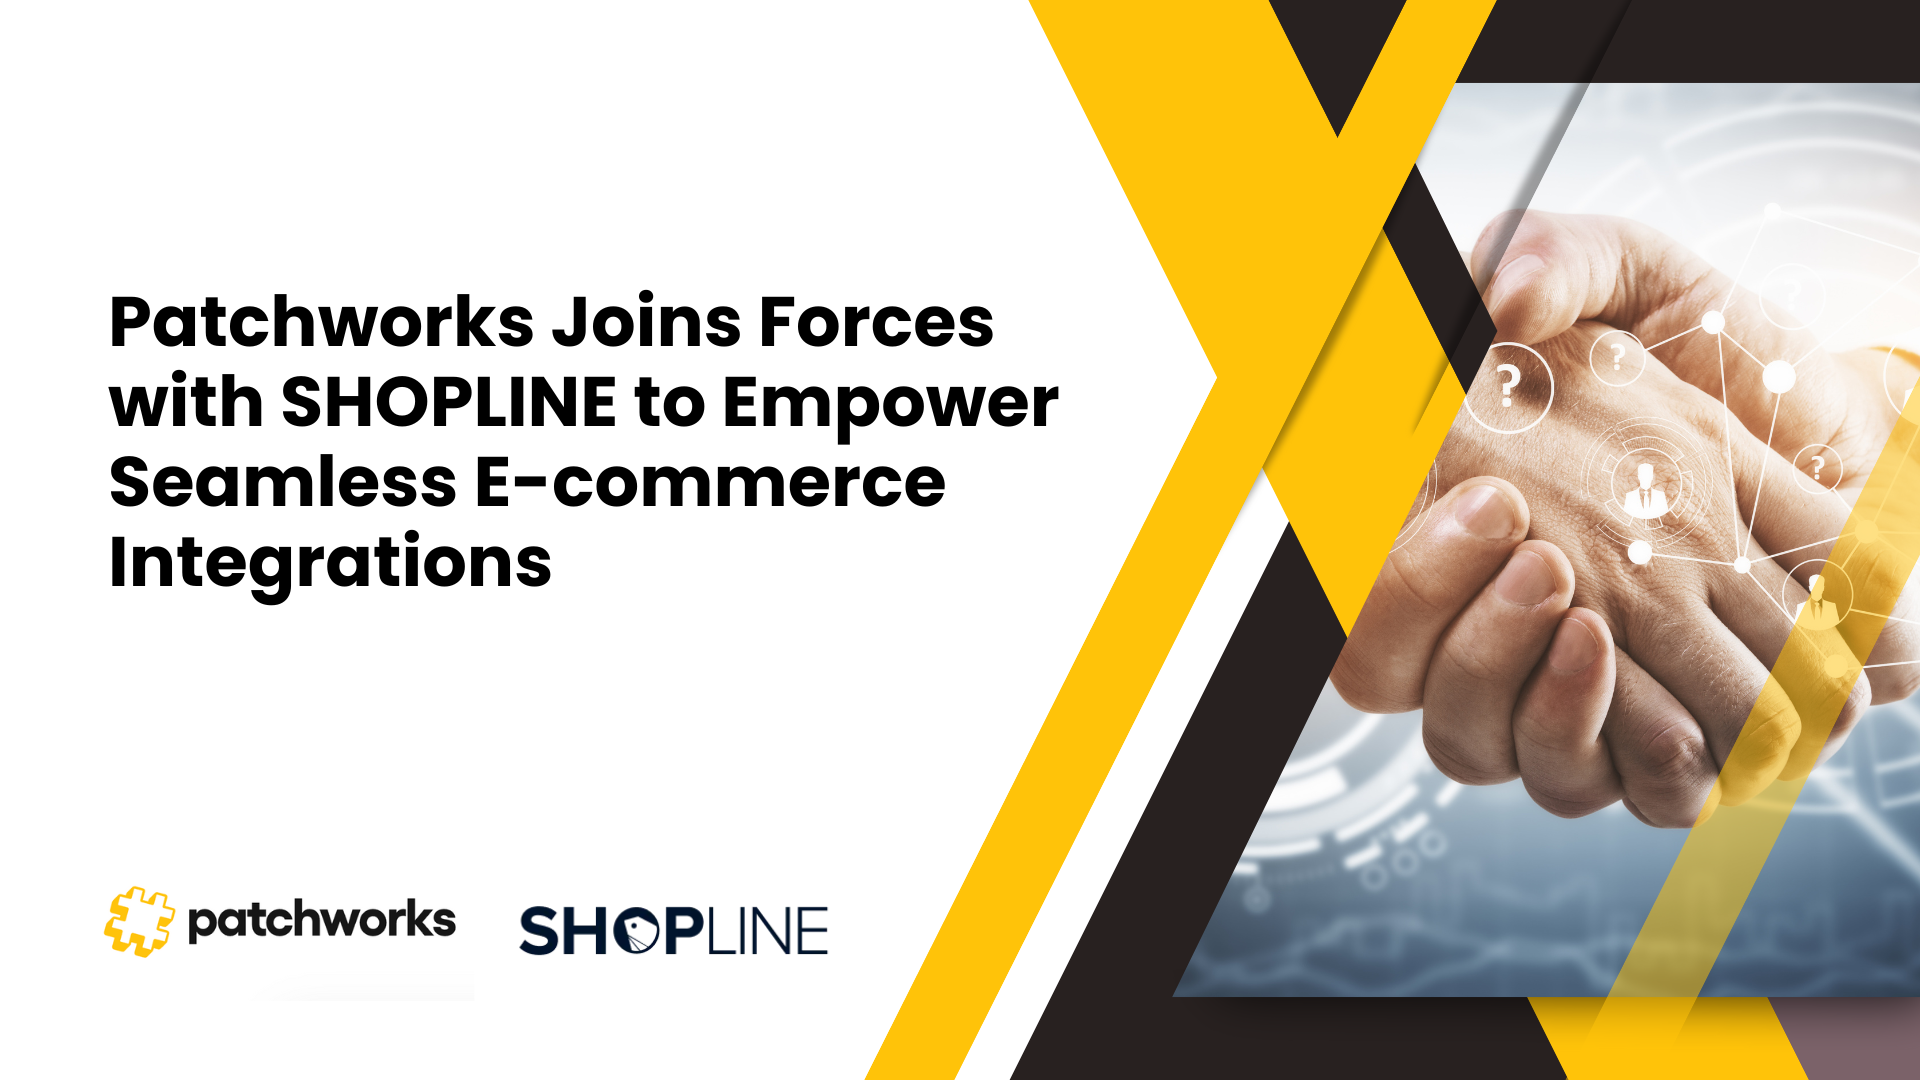 A leading iPaaS Solution Patchworks Joins Forces with SHOPLINE to Empower  Seamless Ecommerce Integrations